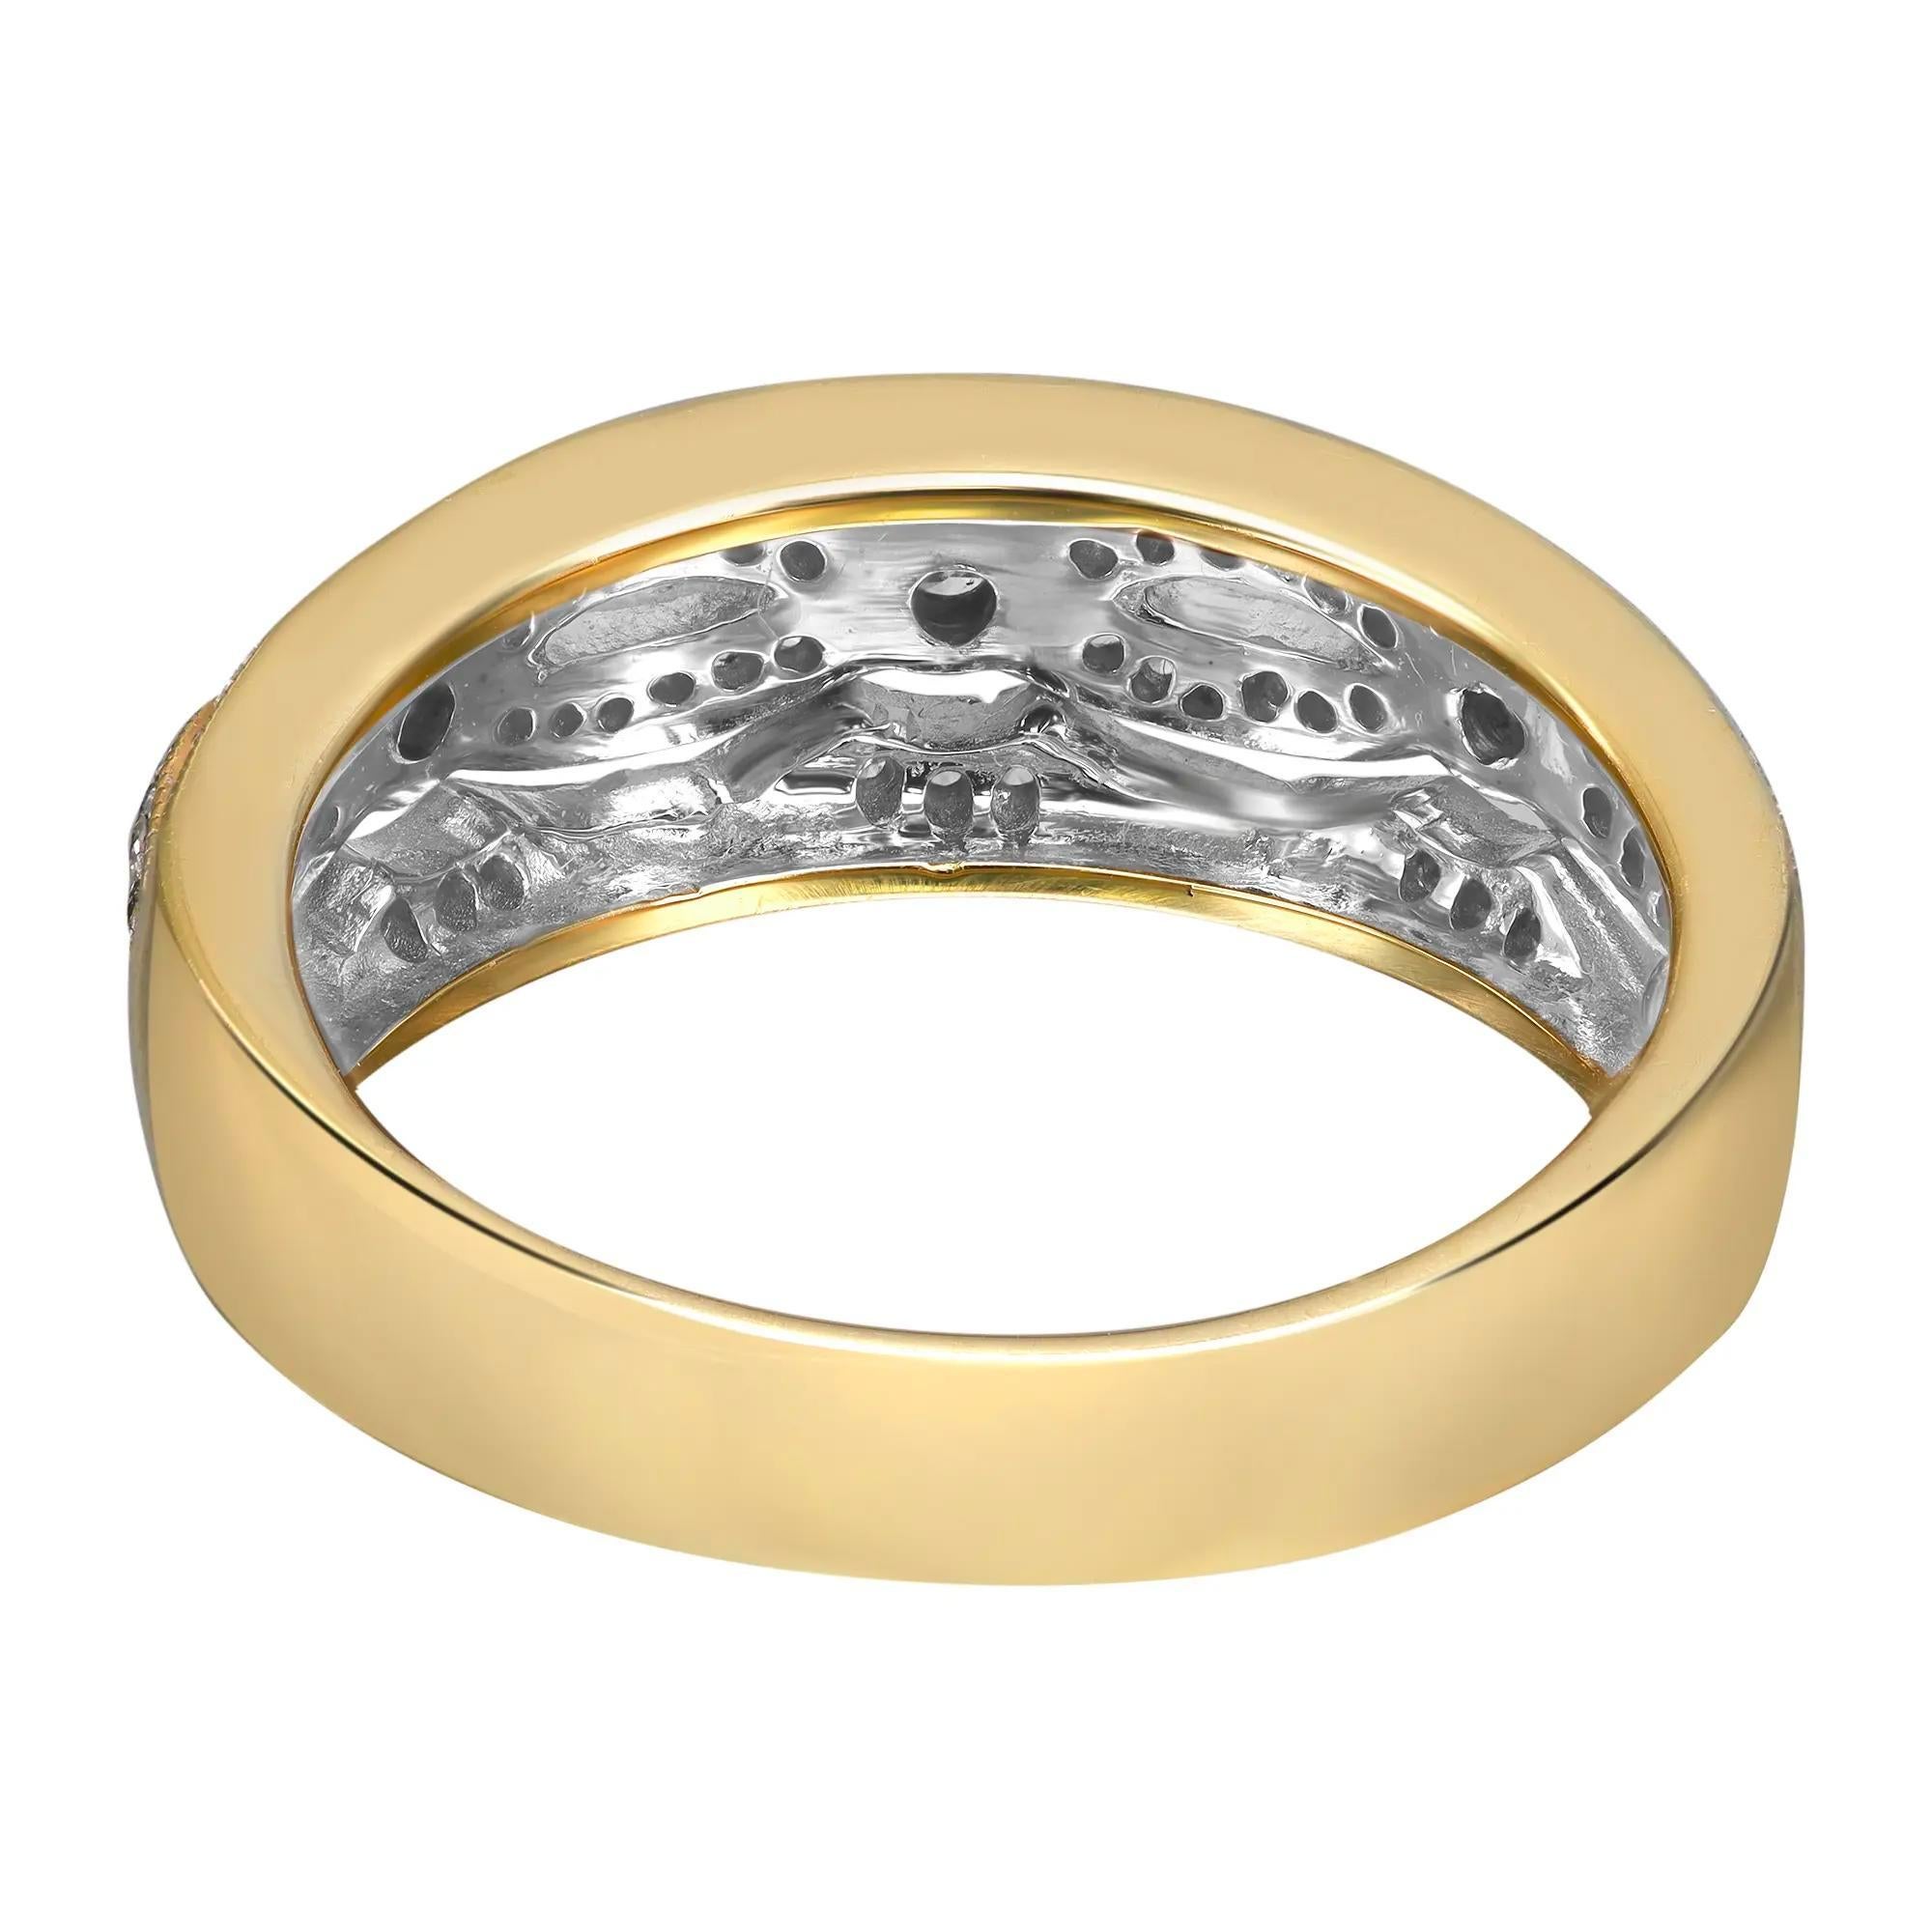 This beautiful ladies band ring features round brilliant cut diamonds in pave setting. Crafted in high polished 14k yellow gold. Diamond color I and SI clarity. Total diamond weight: 0.26 carat. Ring size: 7.5. Ring width: 7mm. Total weight: 4.92